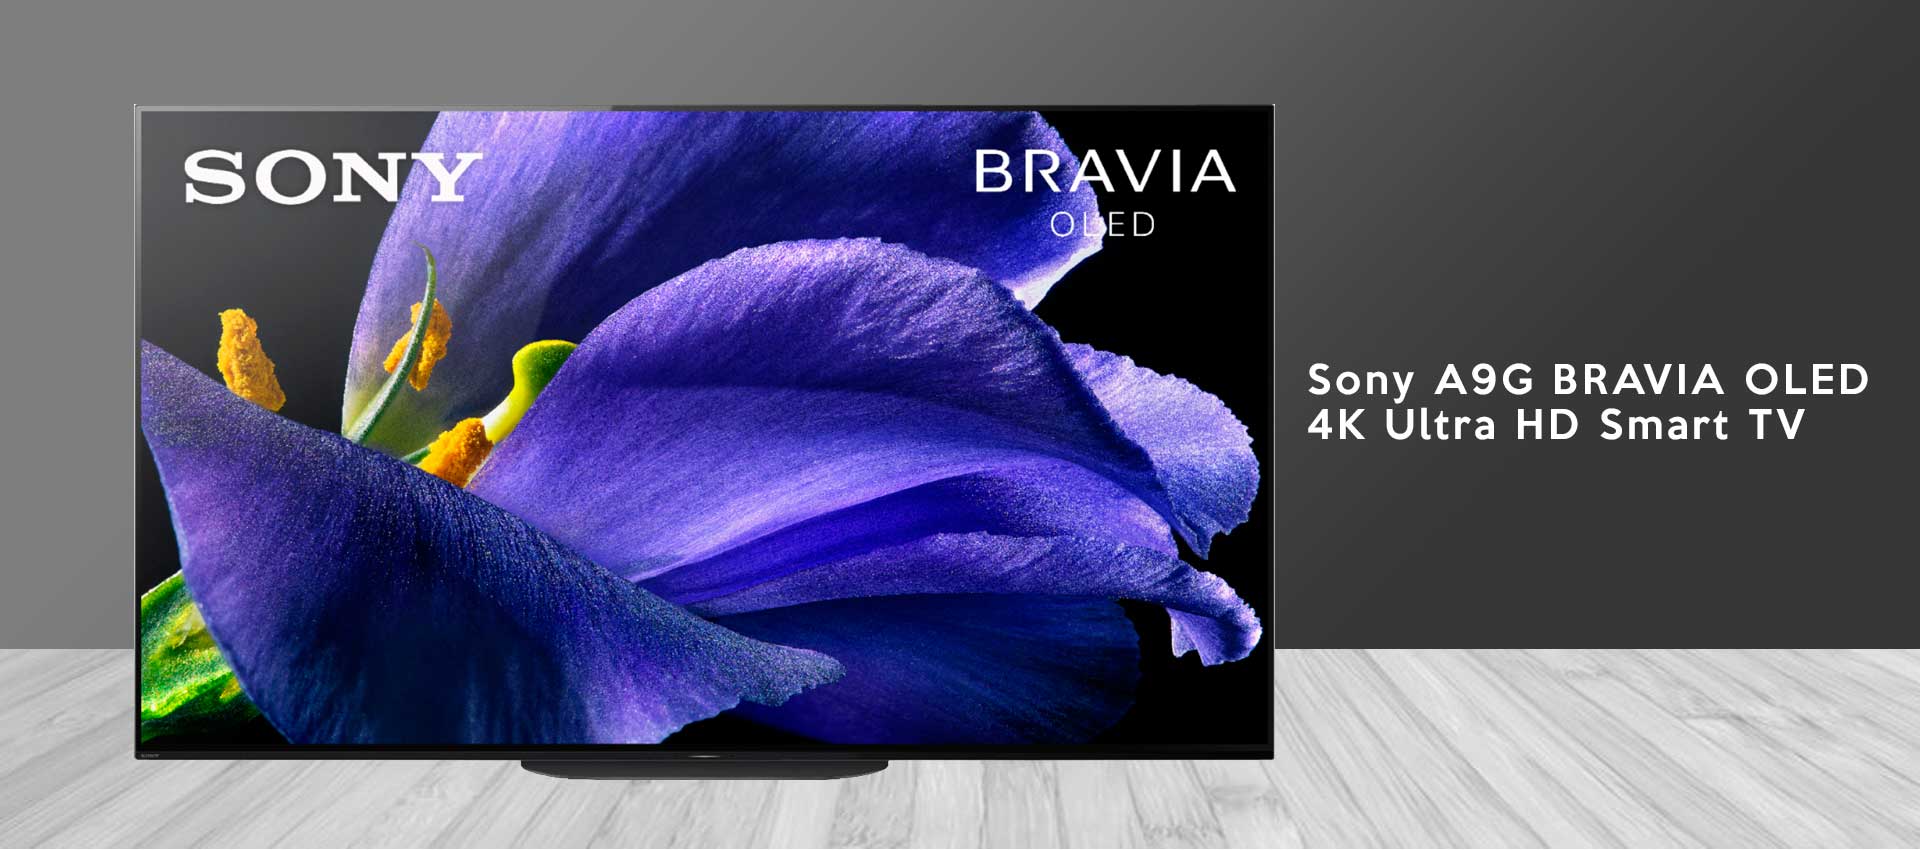 Sony A9G Bravia OLED 4K HD Smart TV in Pakistan- Features, Specifications and more